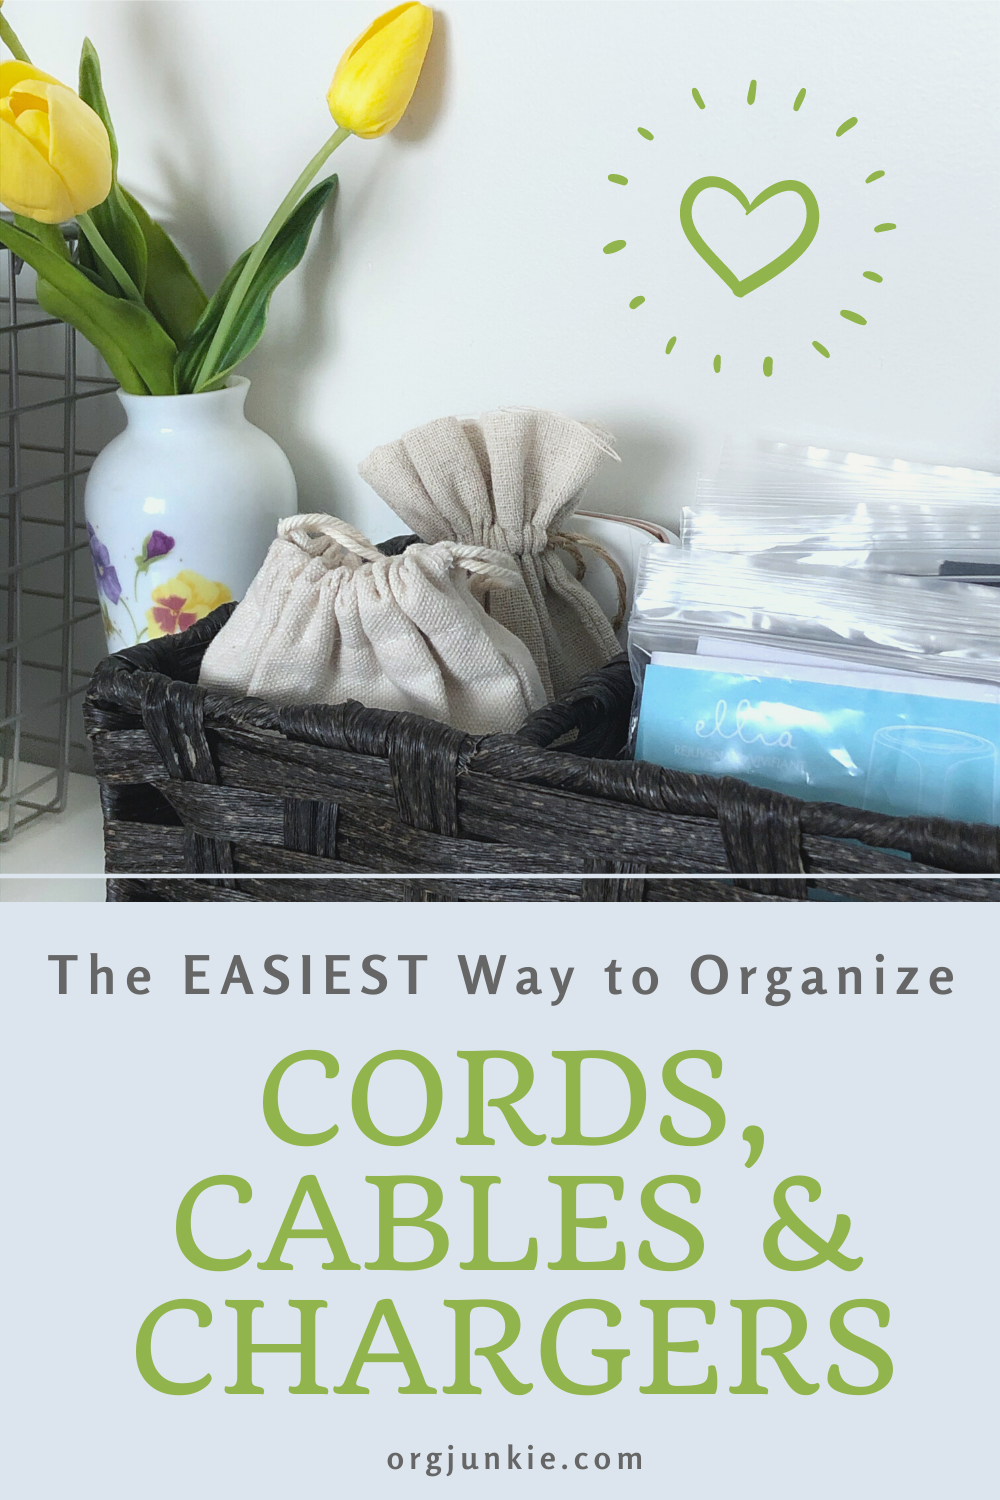 The EASIEST Way to Organize Cords, Cables and Chargers at I'm an Organizing Junkie blog